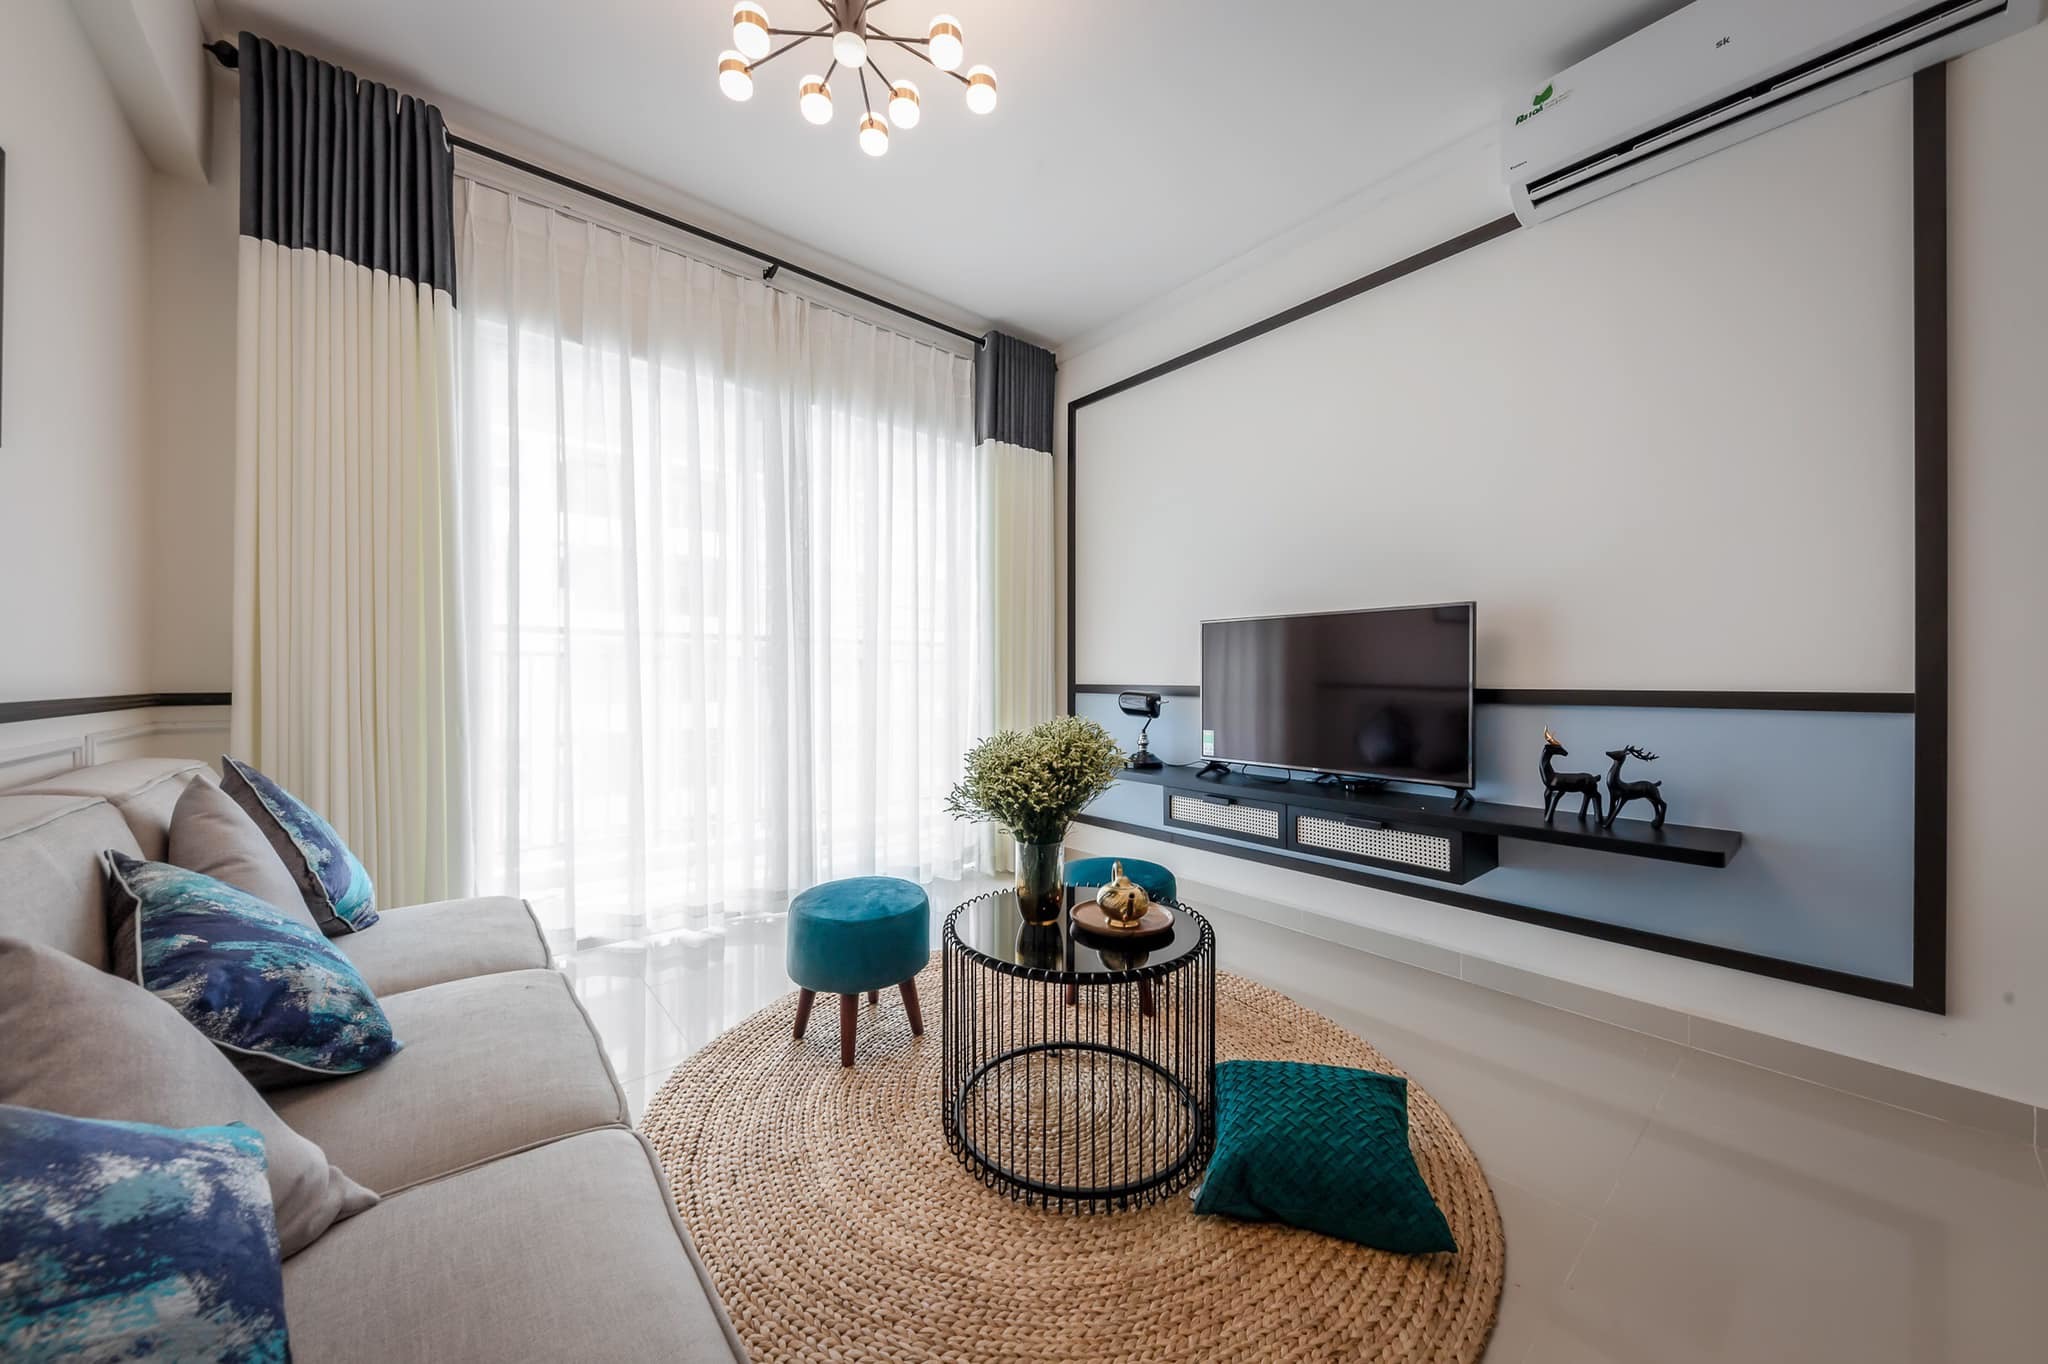 Indochine apartment brings a modern breath, not groundbreaking but making a lasting impression